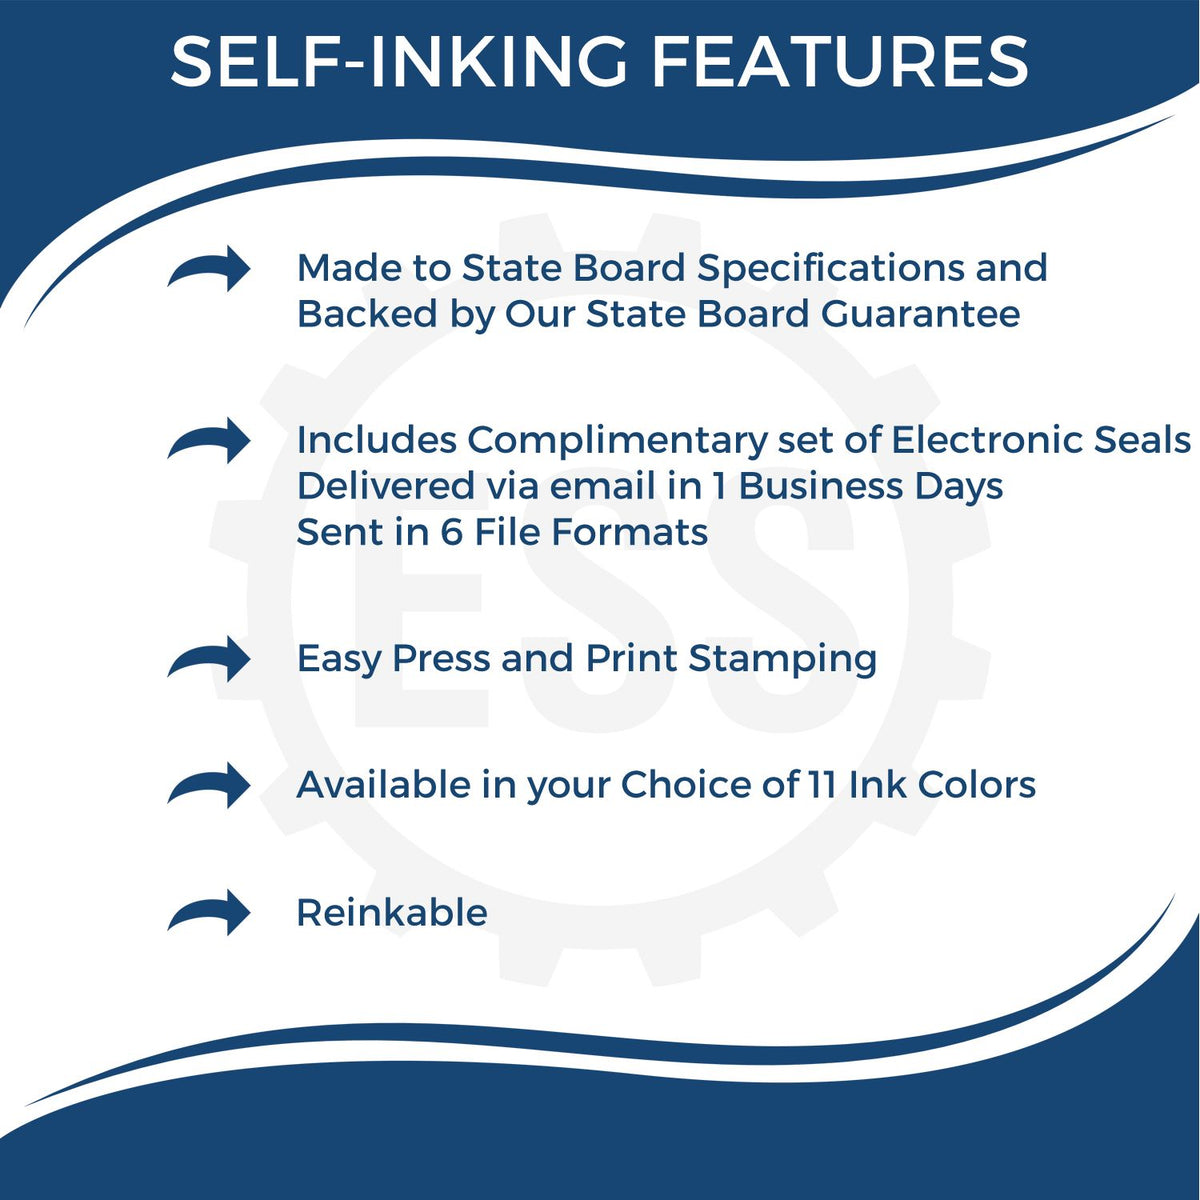 A picture of an infographic highlighting the selling points for the Self-Inking Rectangular Illinois Notary Stamp